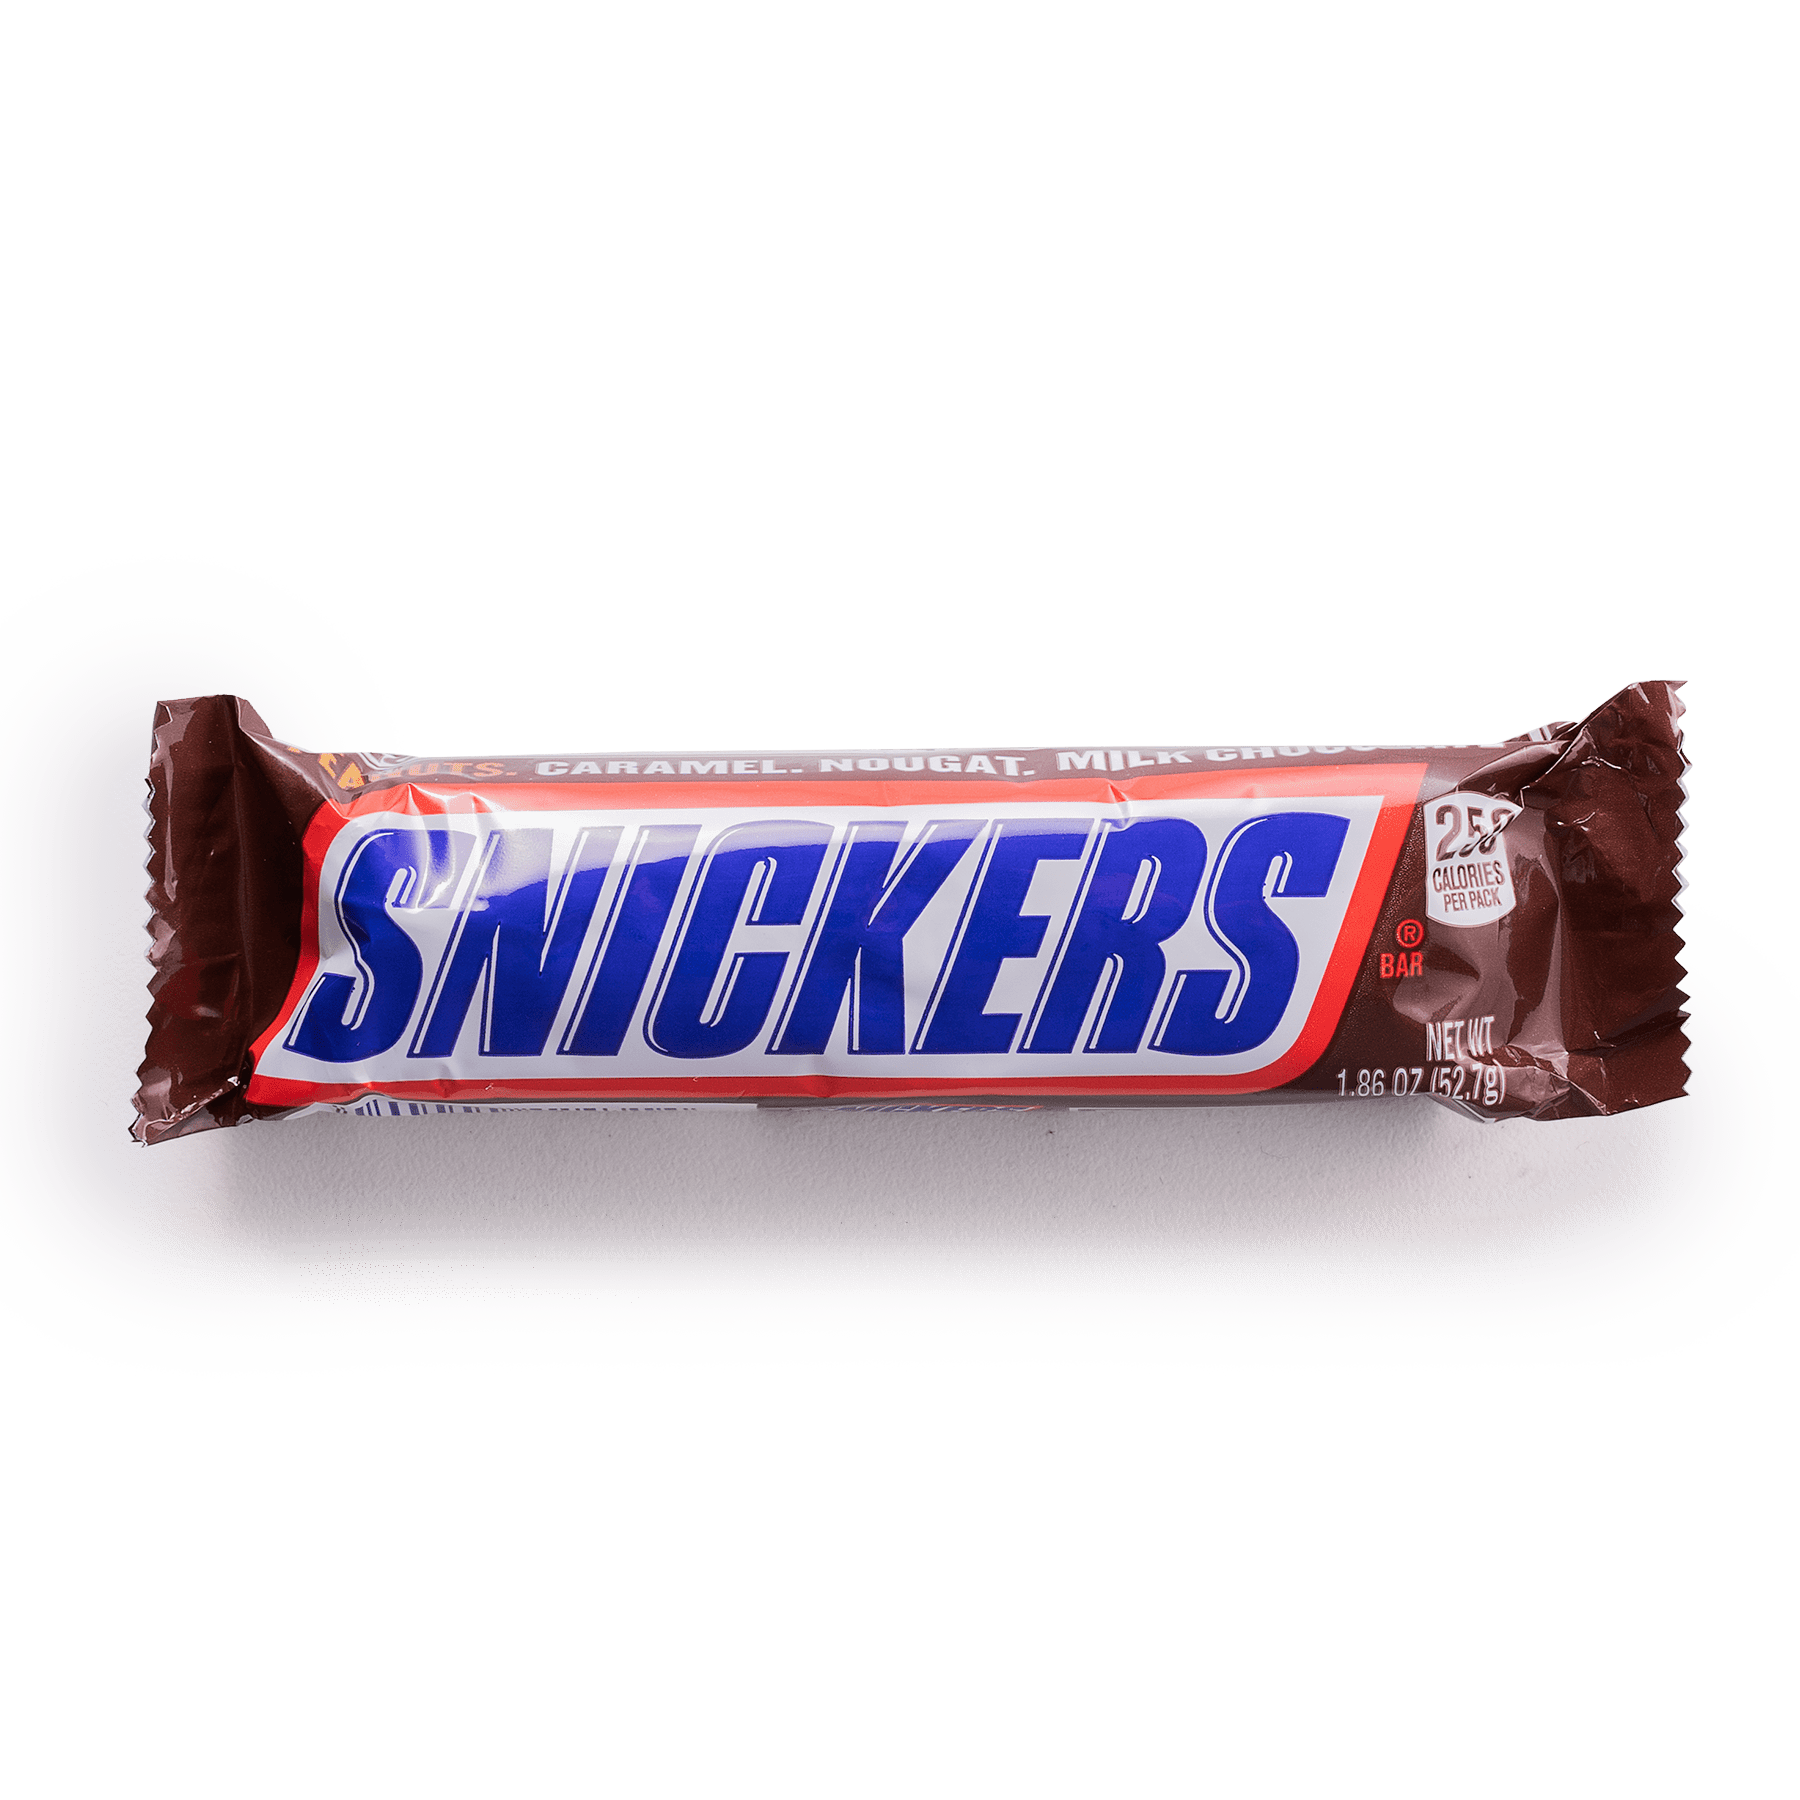 Snickers Bar PNG Images Transparent Background | PNG Play